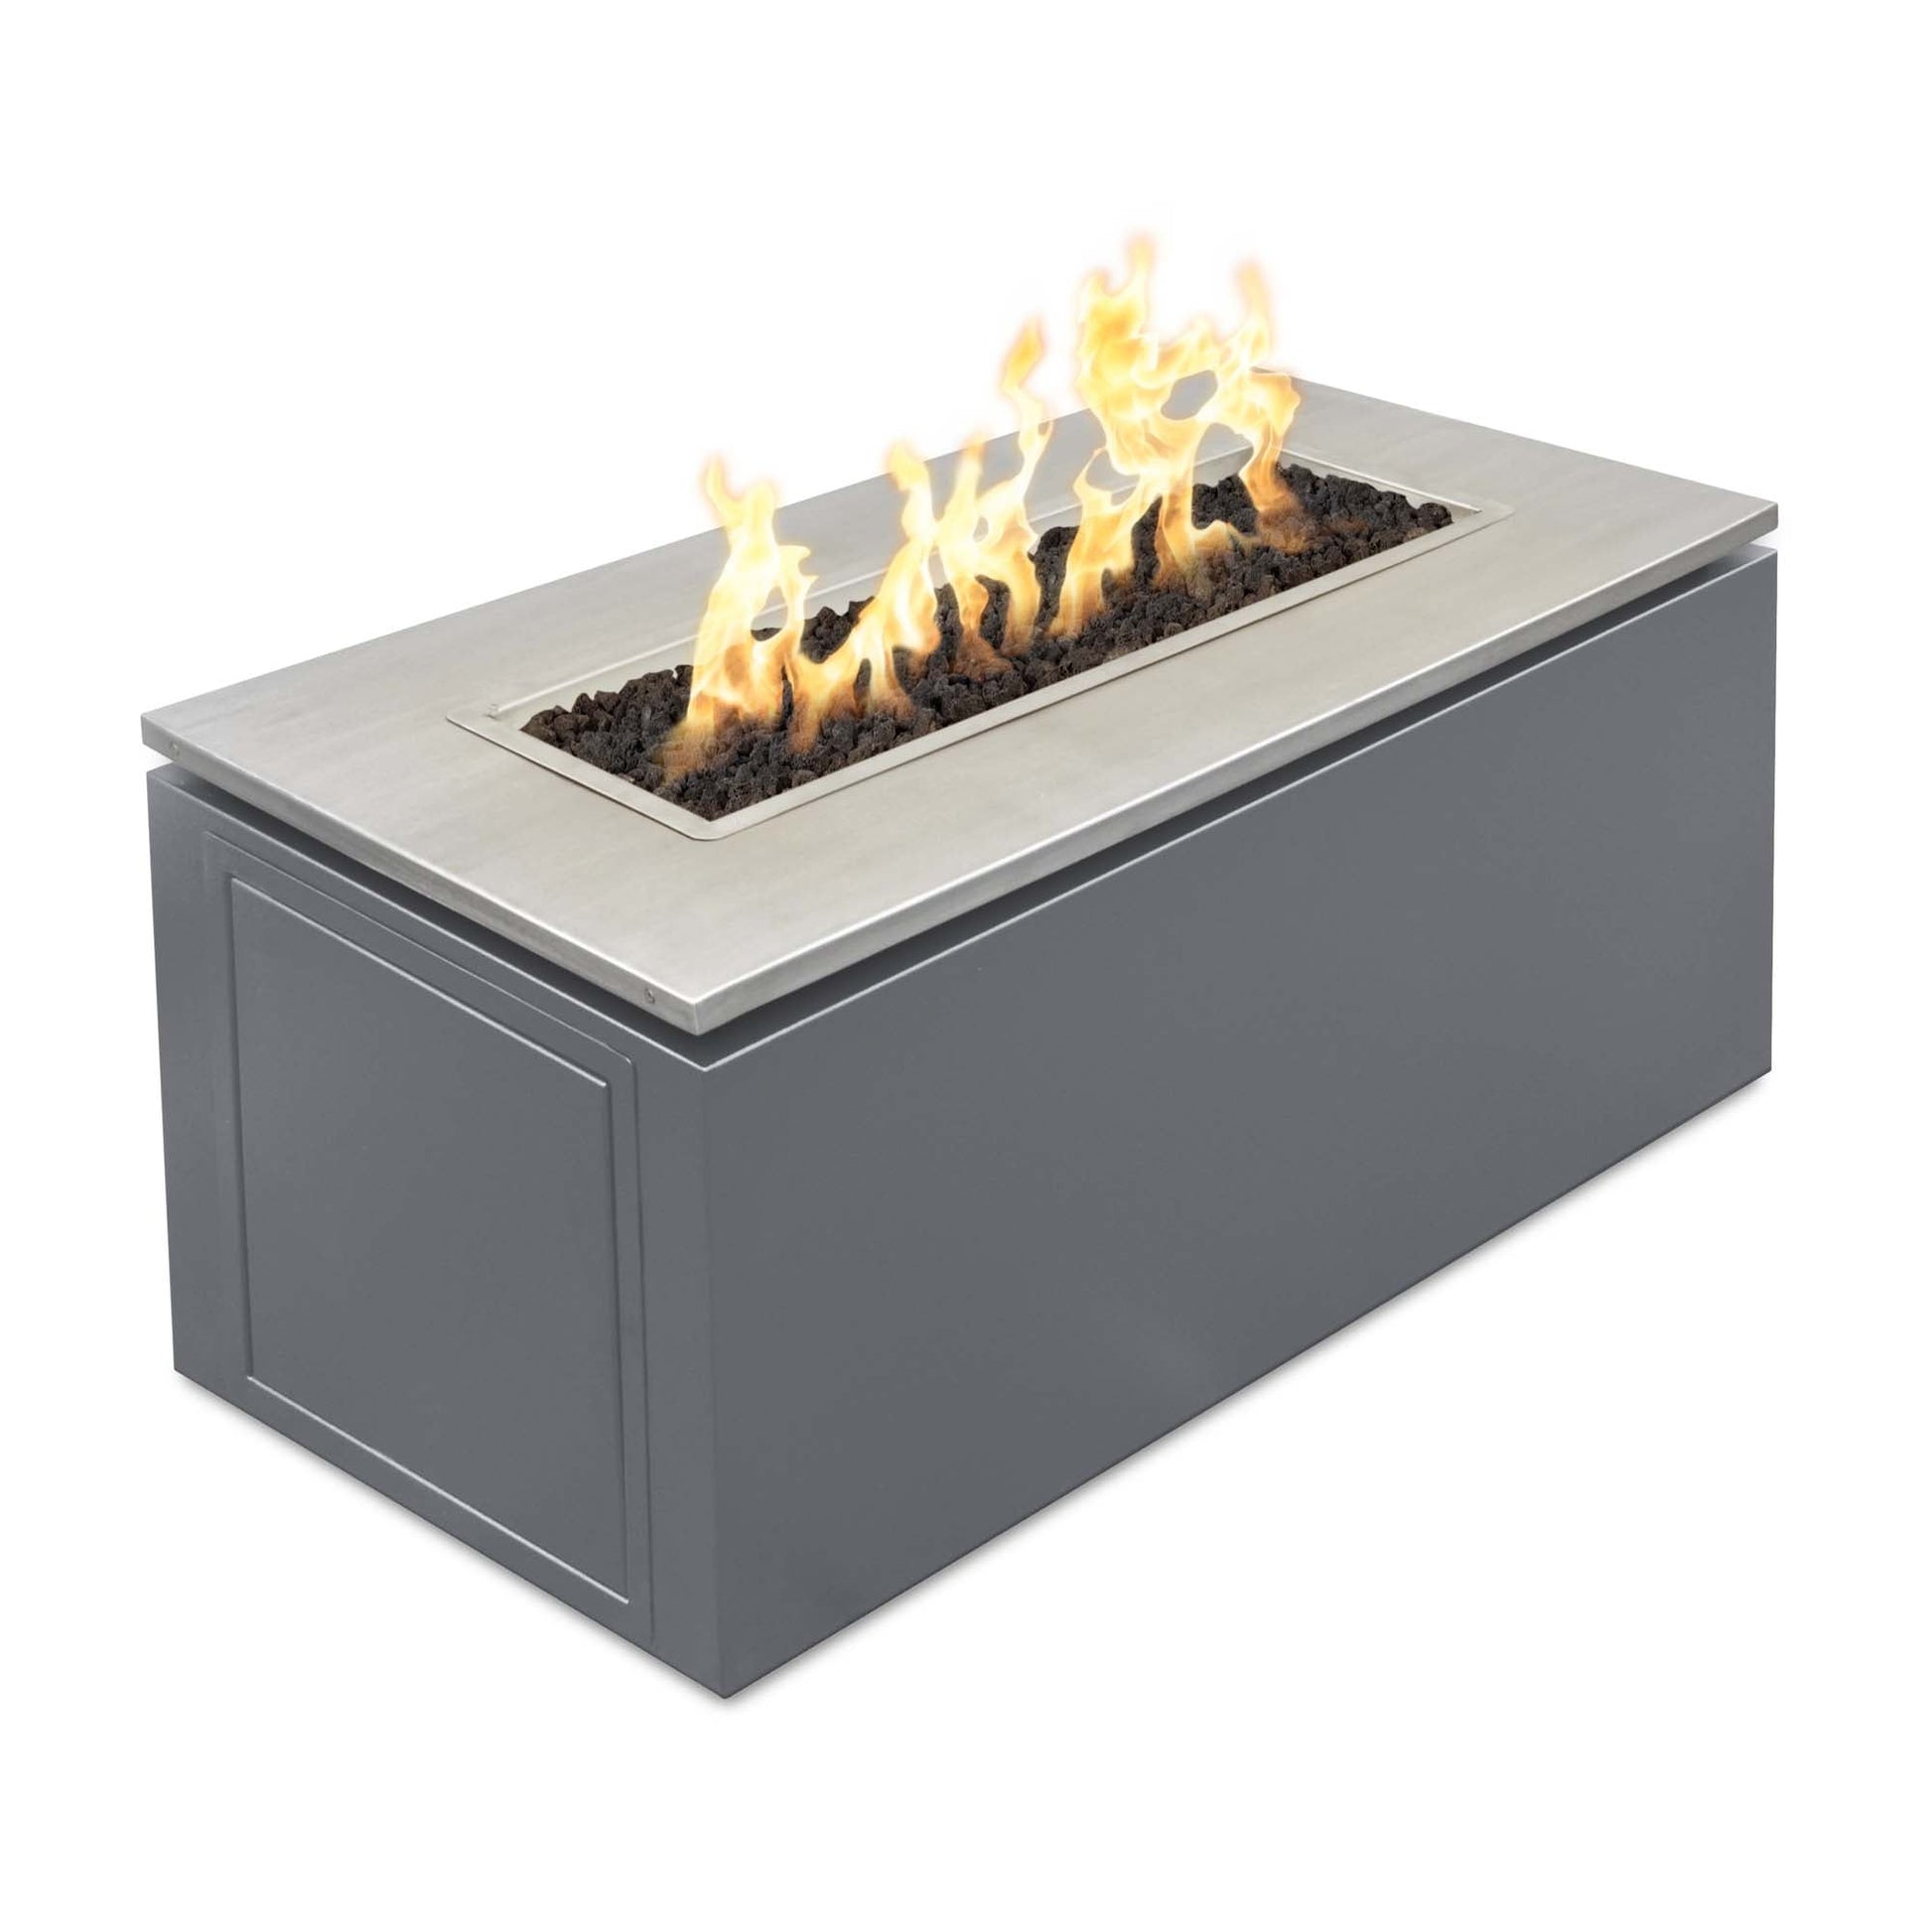 The Outdoor Plus Rectangular Merona 46" Hammered Copper Liquid Propane Fire Pit with Match Lit with Flame Sense Ignition